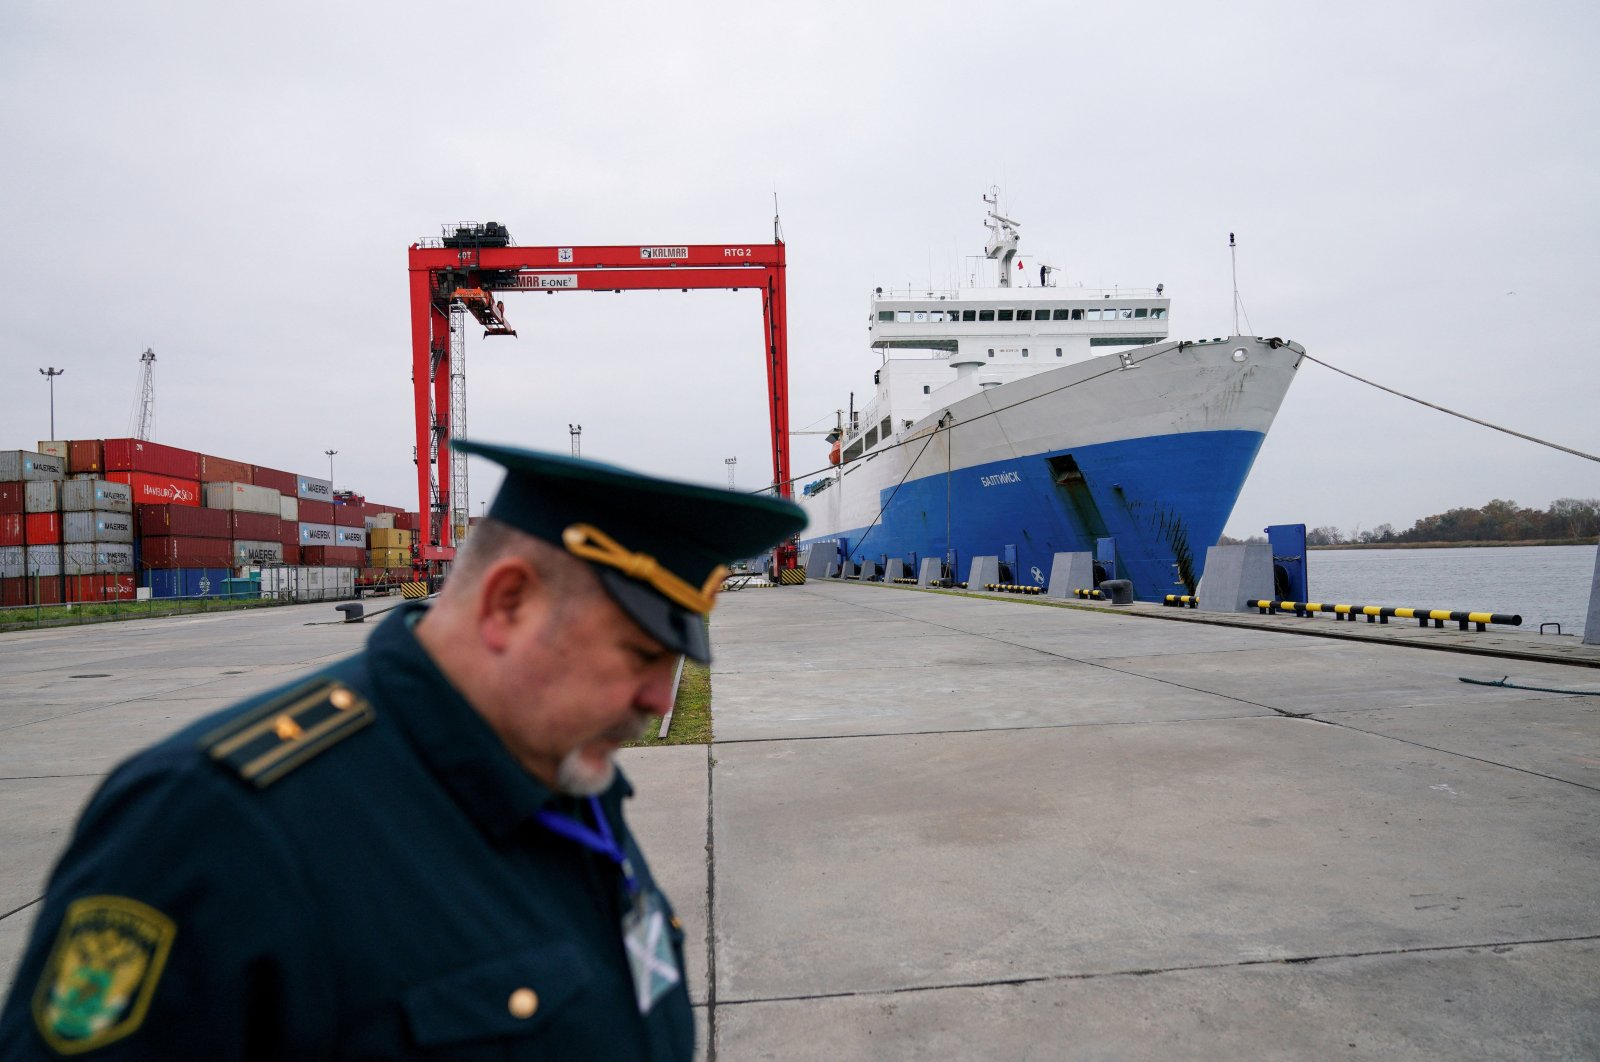 A Russian customs officer works at a commercial port in the Baltic Sea town of Baltiysk in the Kaliningrad region, Russia, Oct. 28, 2021. (Reuters Photo)